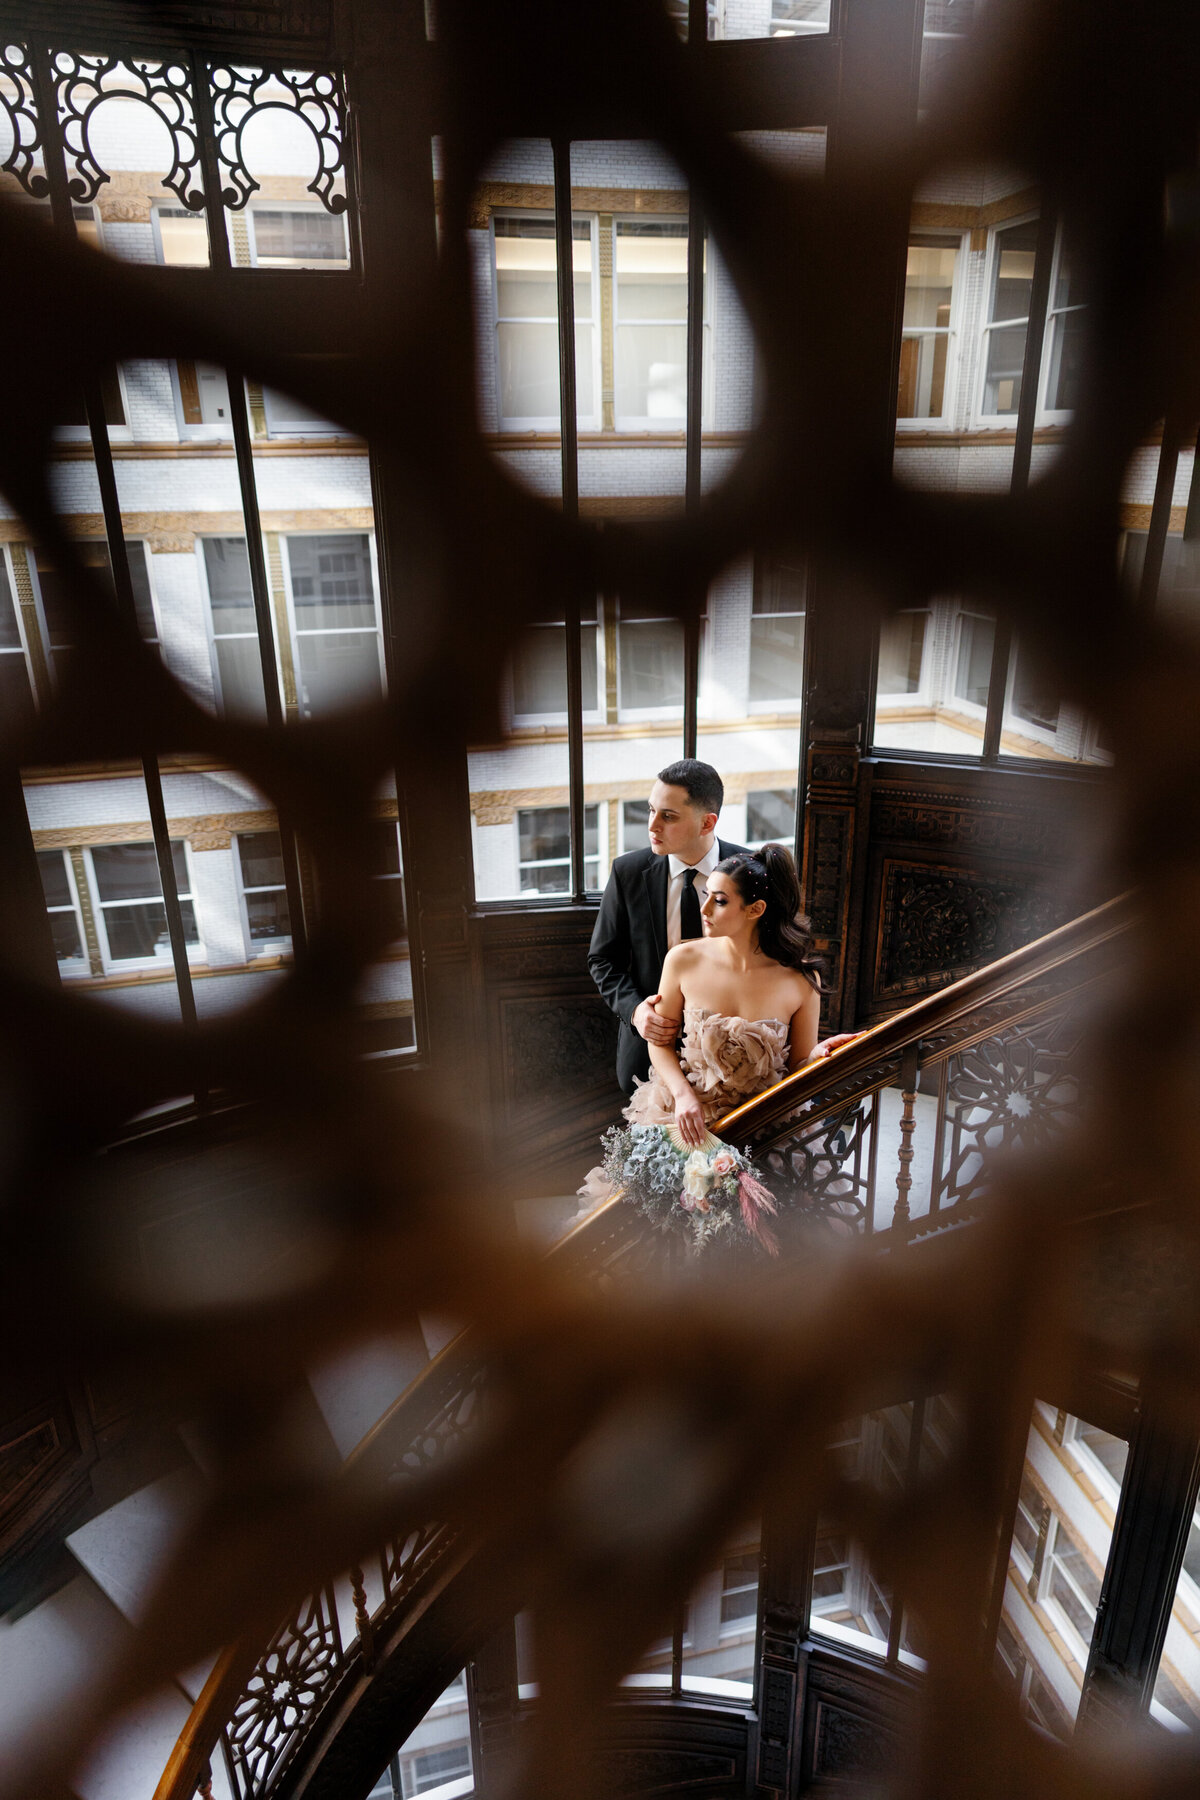 Aspen-Avenue-Chicago-Wedding-Photographer-Rookery-Engagement-Session-Histoircal-Stairs-Moody-Dramatic-Magazine-Unique-Gown-Stemming-From-Love-Emily-Rae-Bridal-Hair-FAV-27